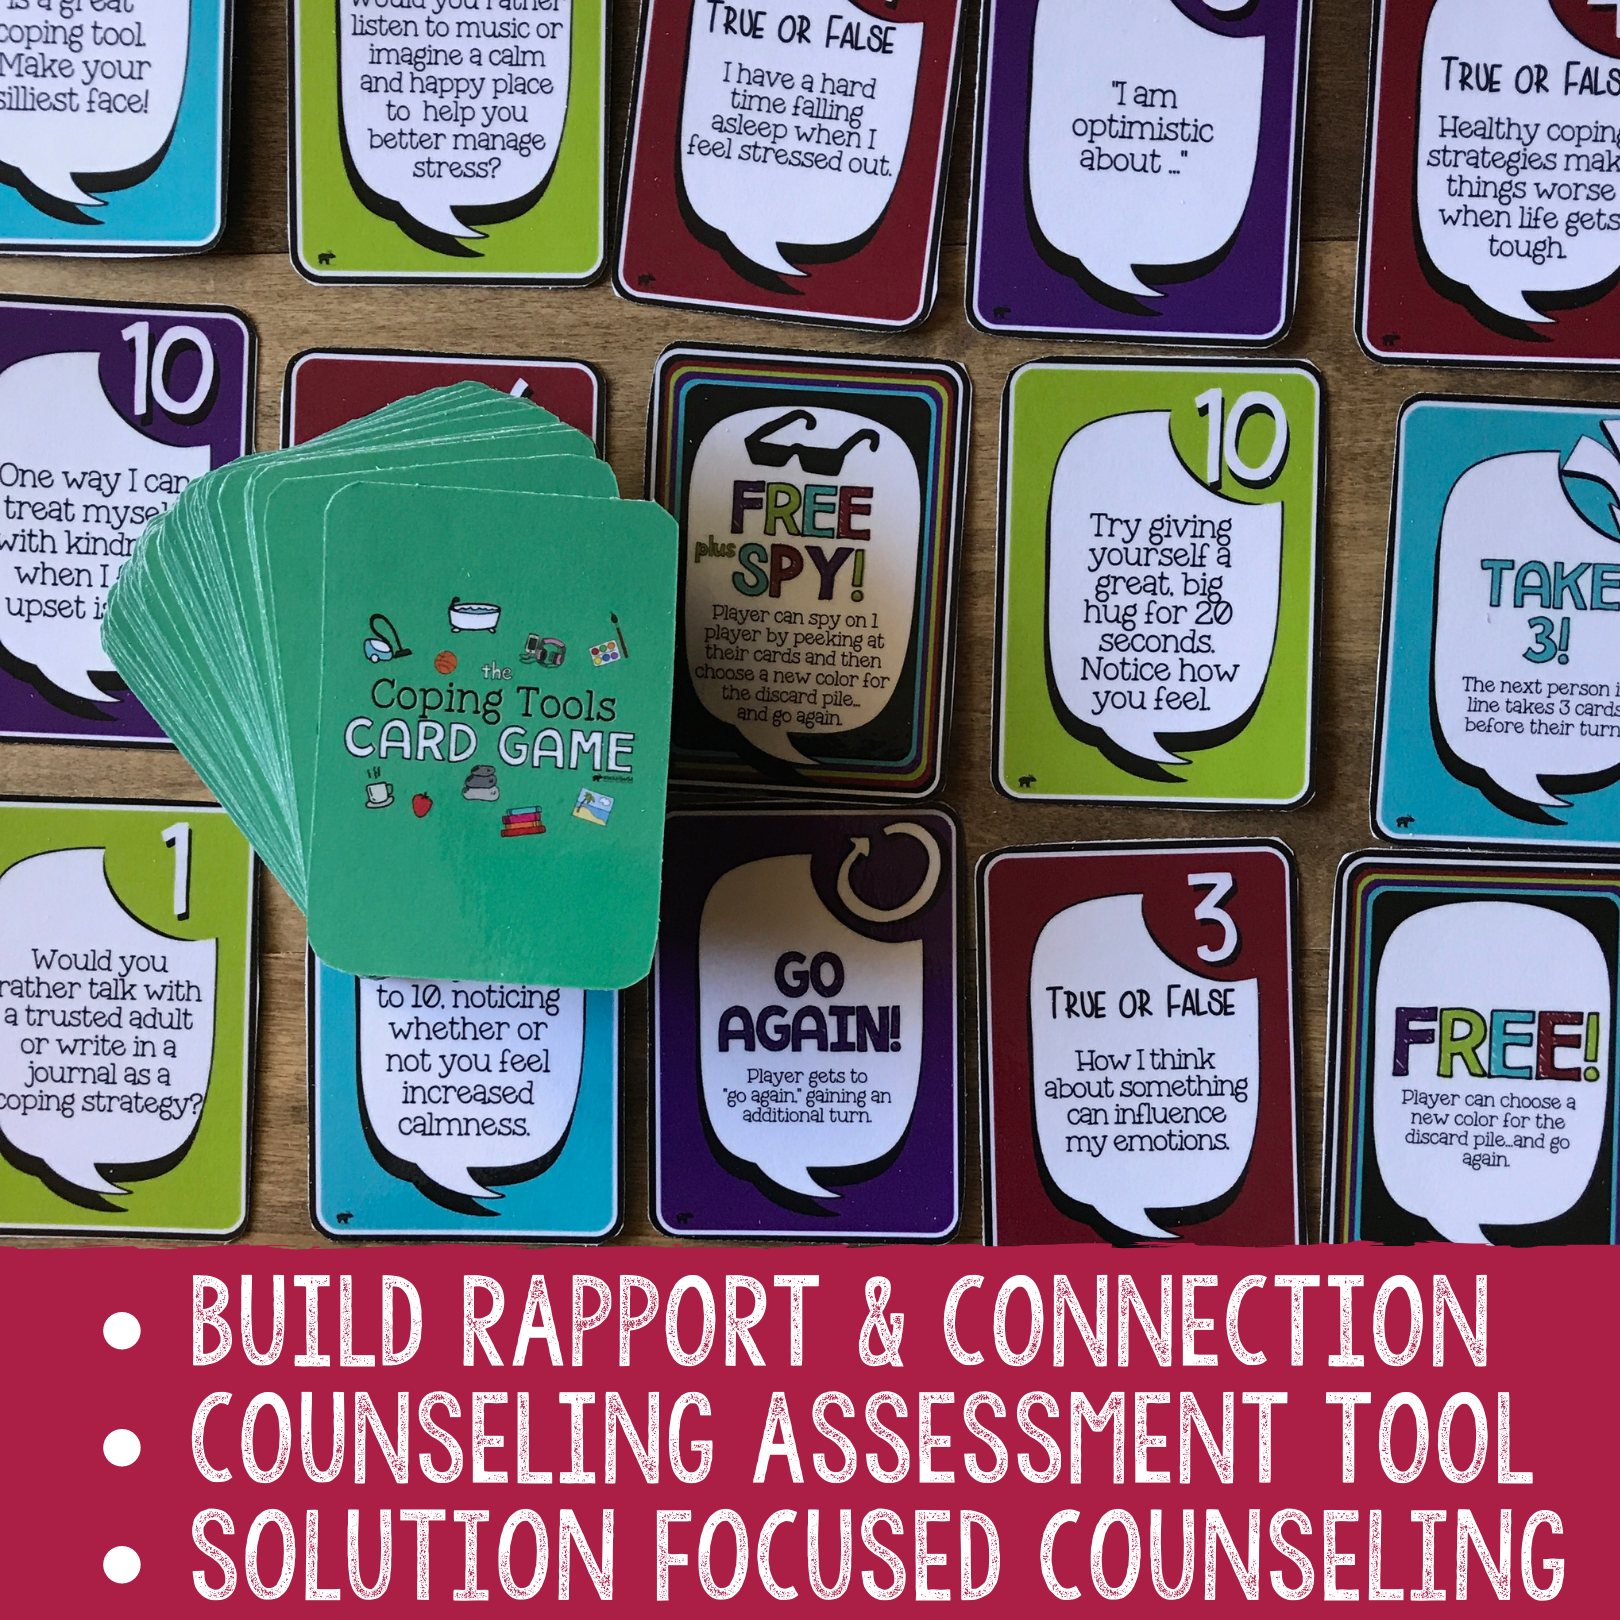 Coping Tools Game for Kids